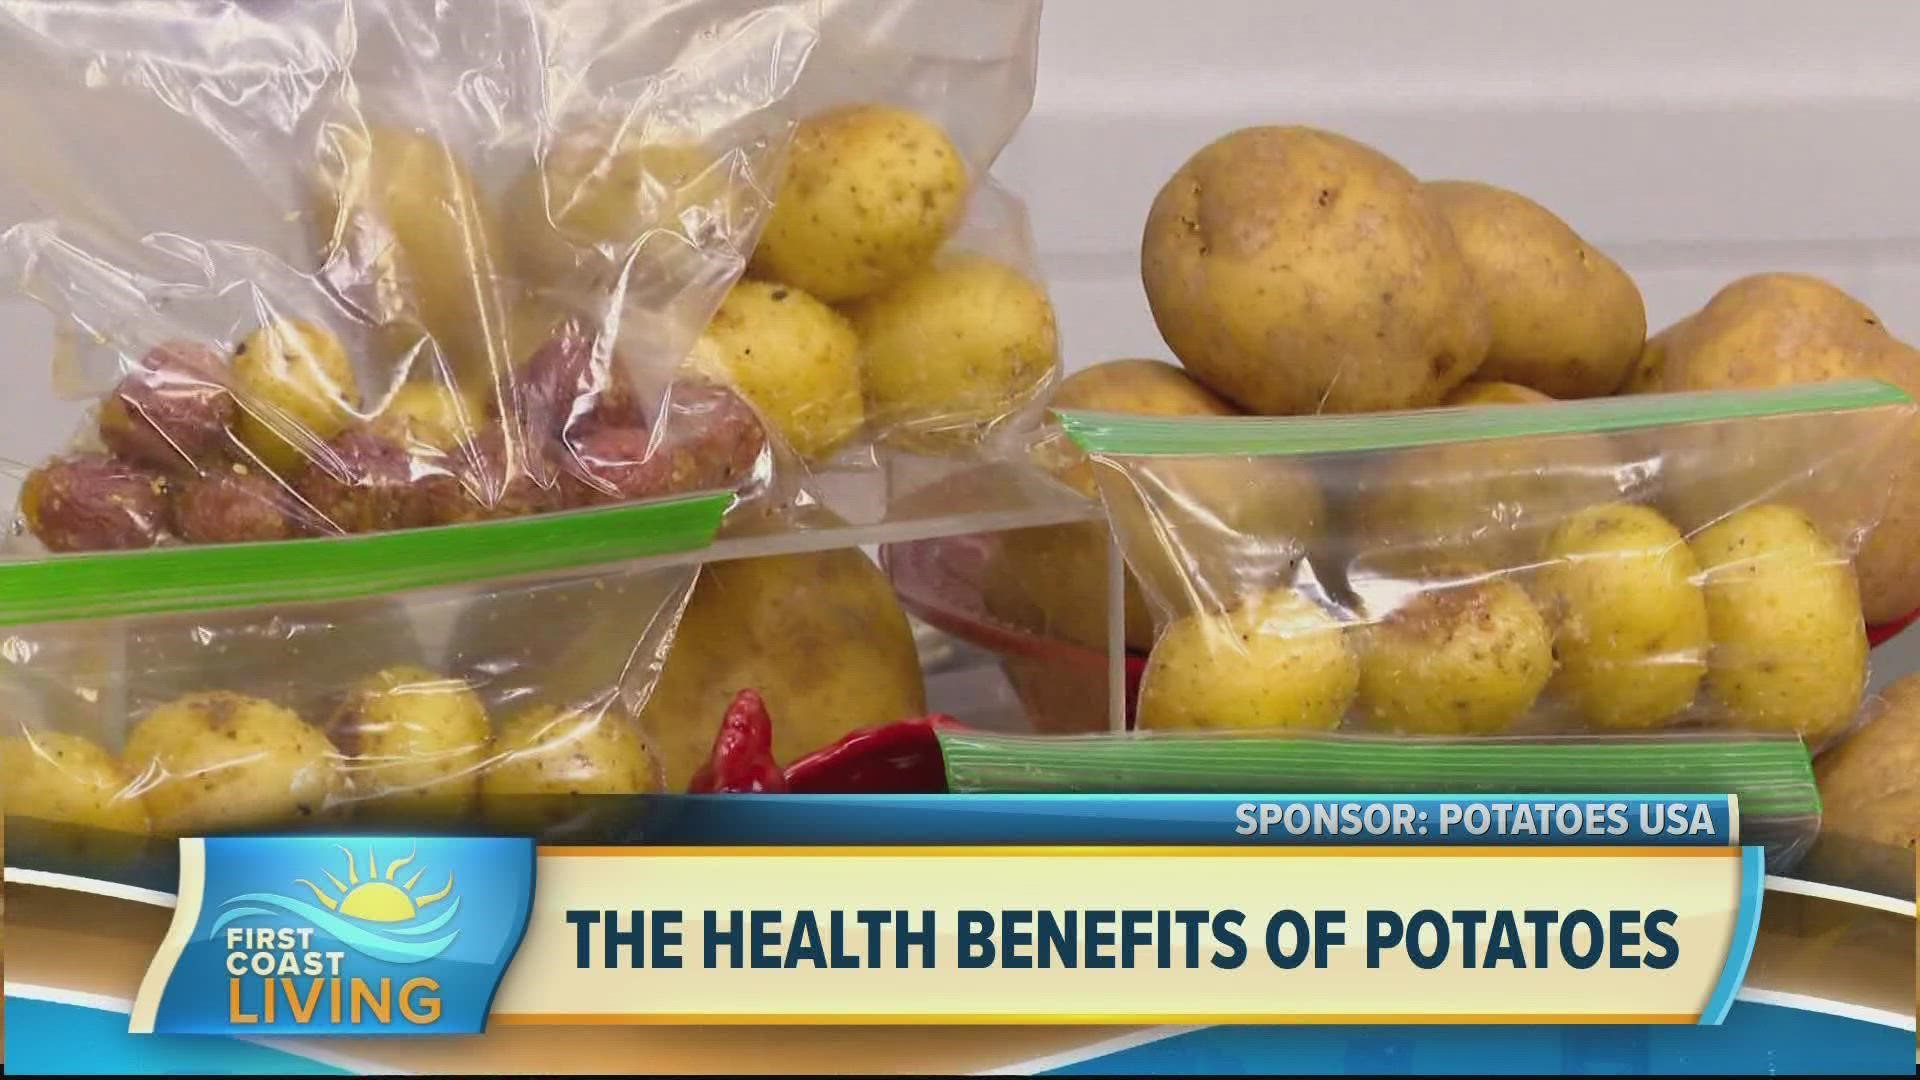 Cara Harbstreet, Intuitive Eating Registered Dietician joins us our show dispelling potato myths and shares why you should make them a regular part of your diet.